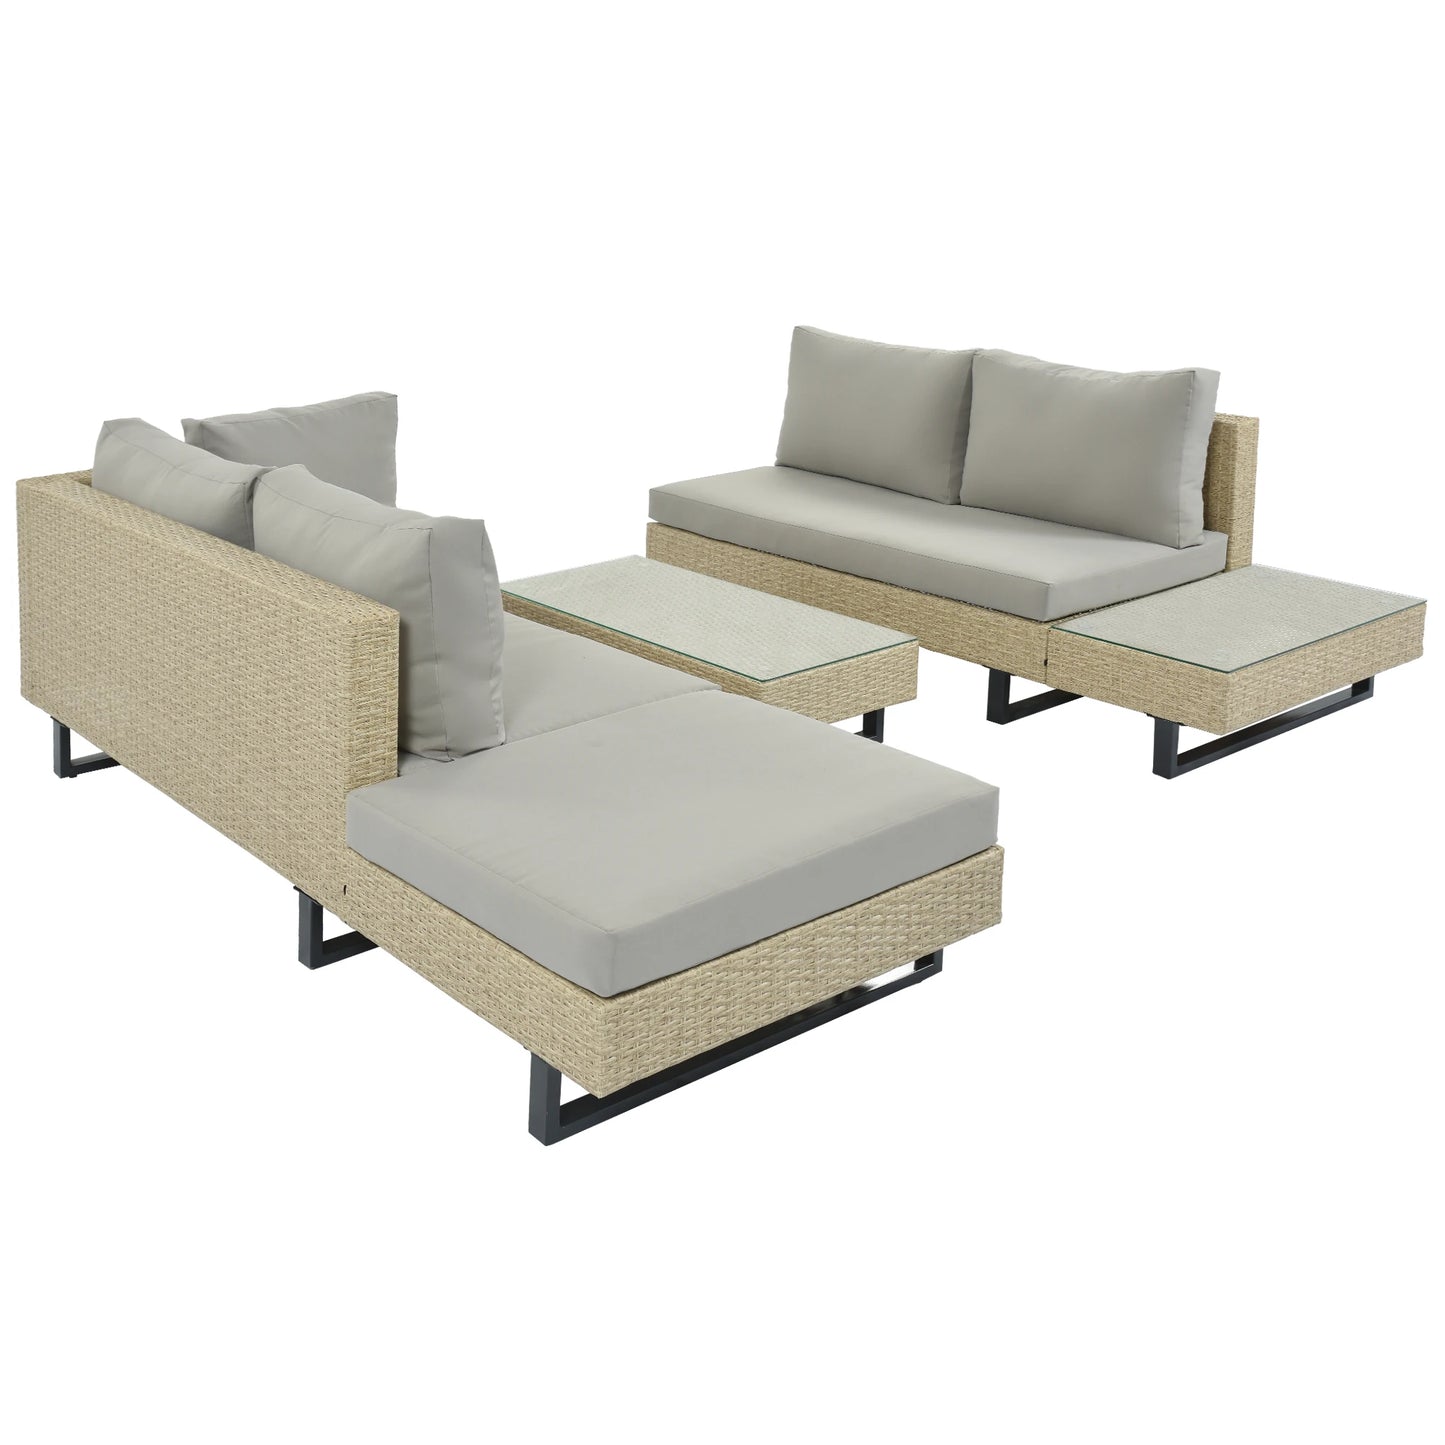 3-piece Outdoor Wicker Sofa Patio Furniture Set, L-shaped Corner Sofa, Water And UV Protected Two Glass Table